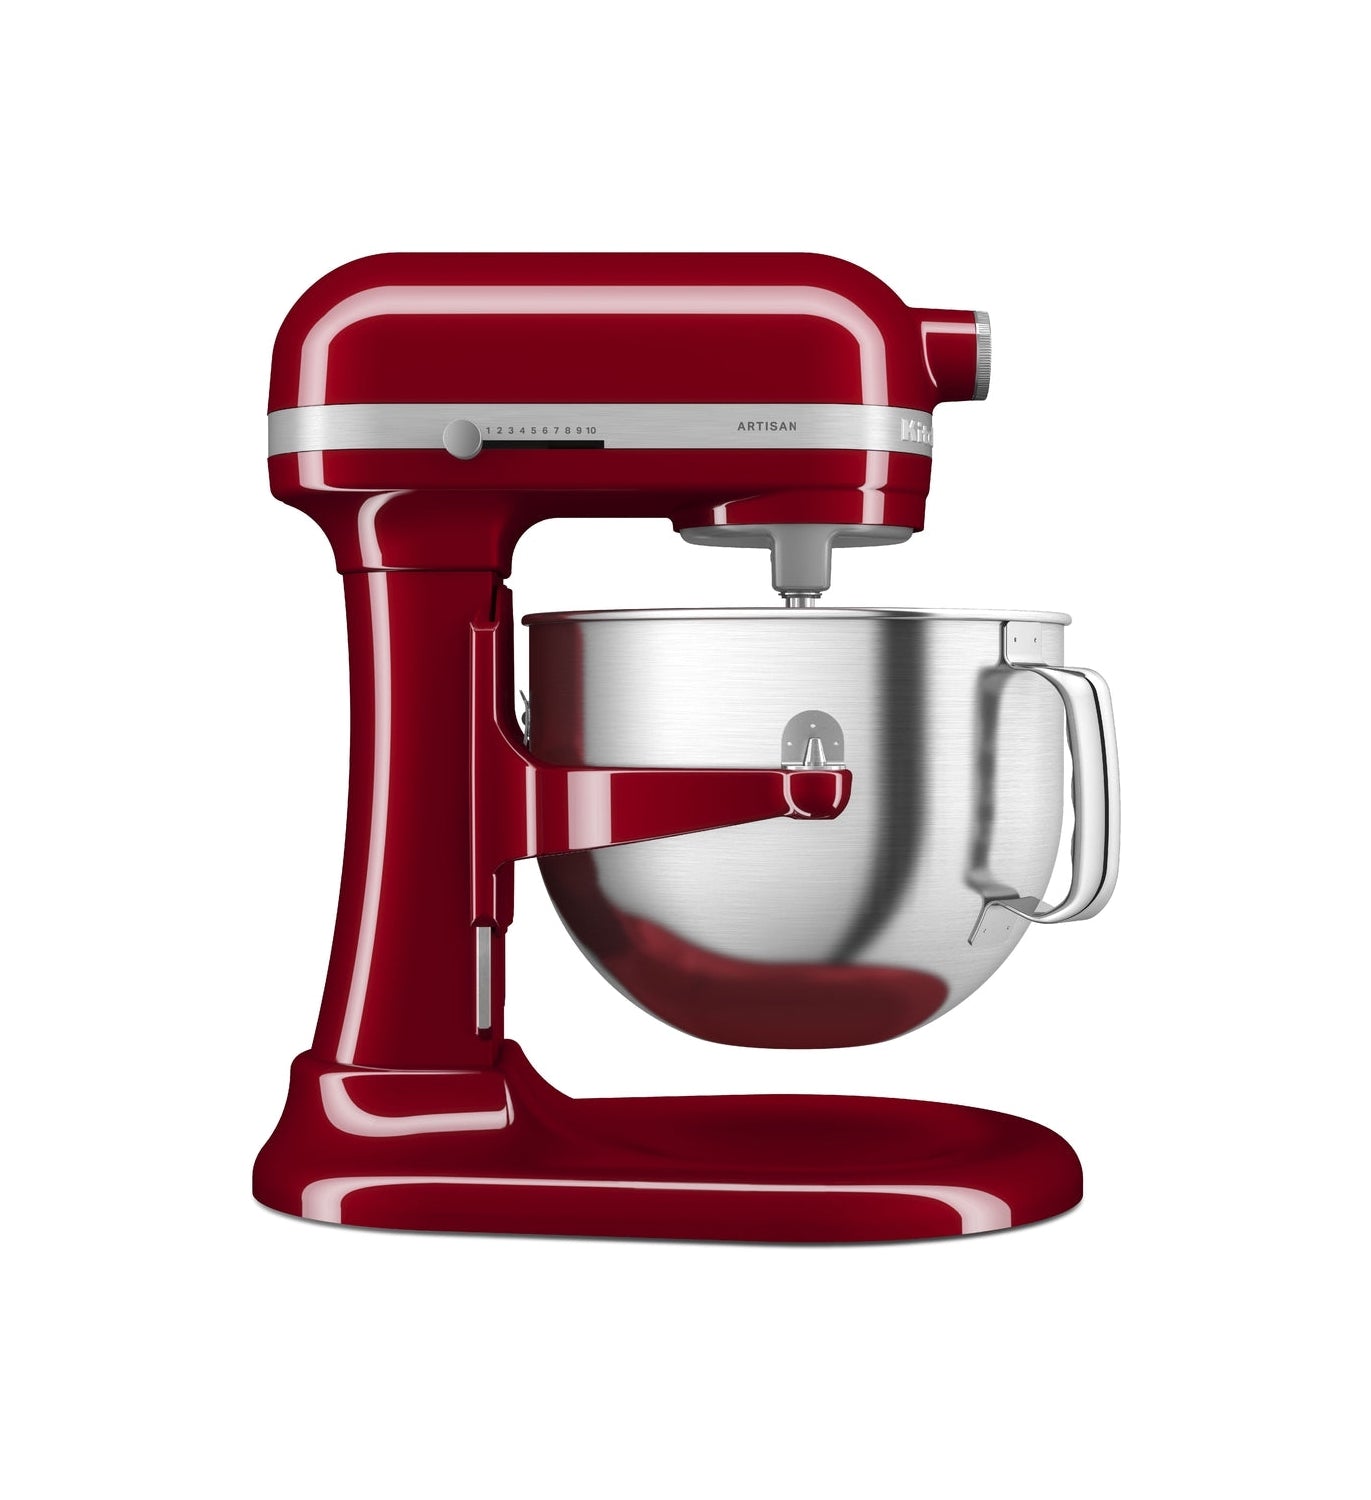 Kitchen Aid Artisan Bowl Lift Stand Mixer 6.6 L, Empired Red